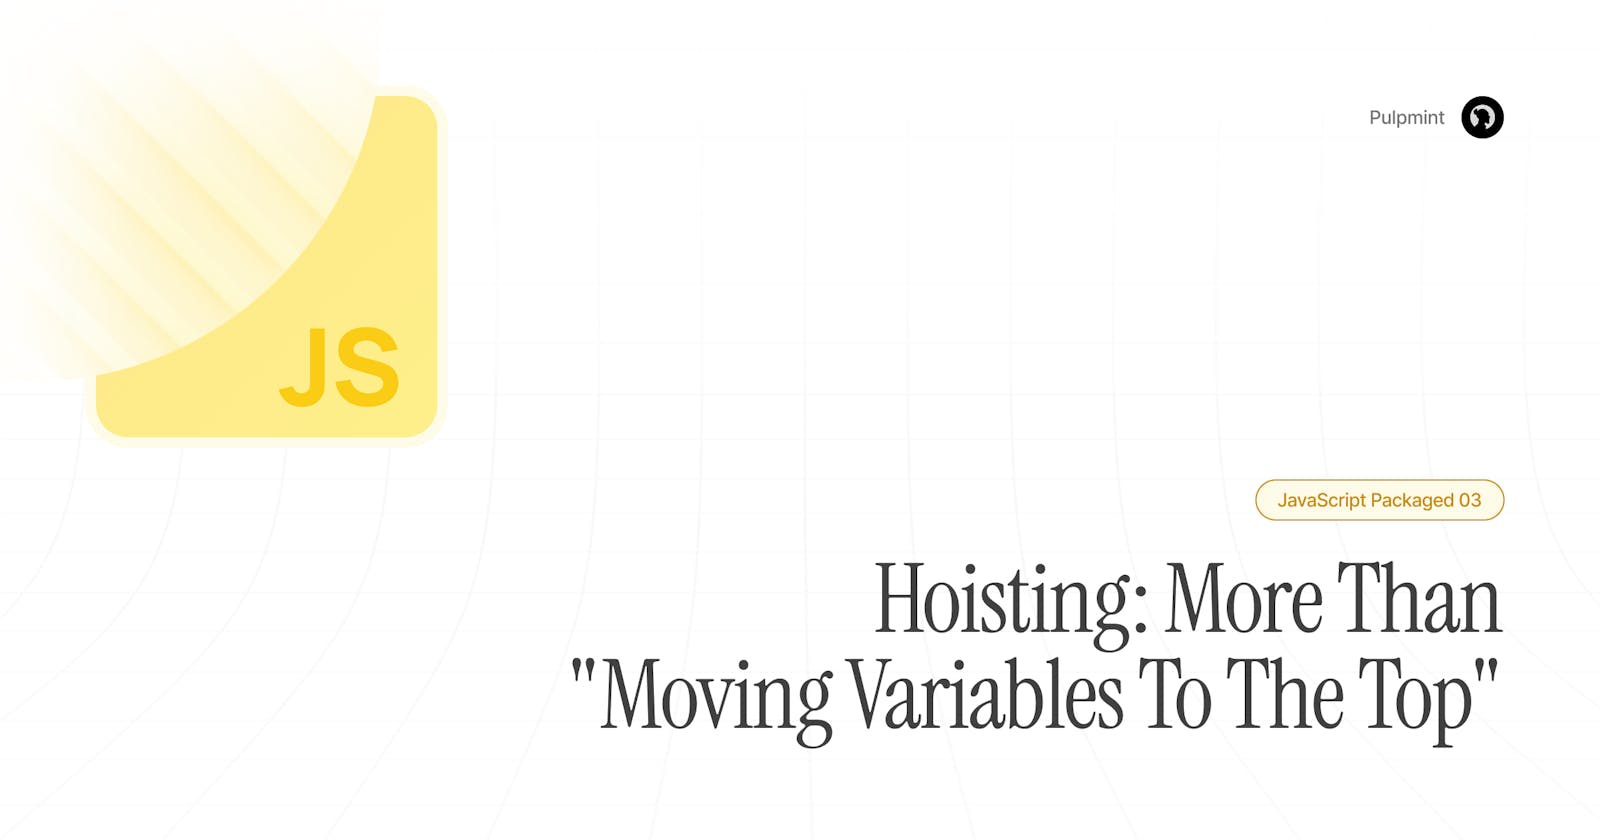 Hoisting: More Than "Moving Variables To The Top"